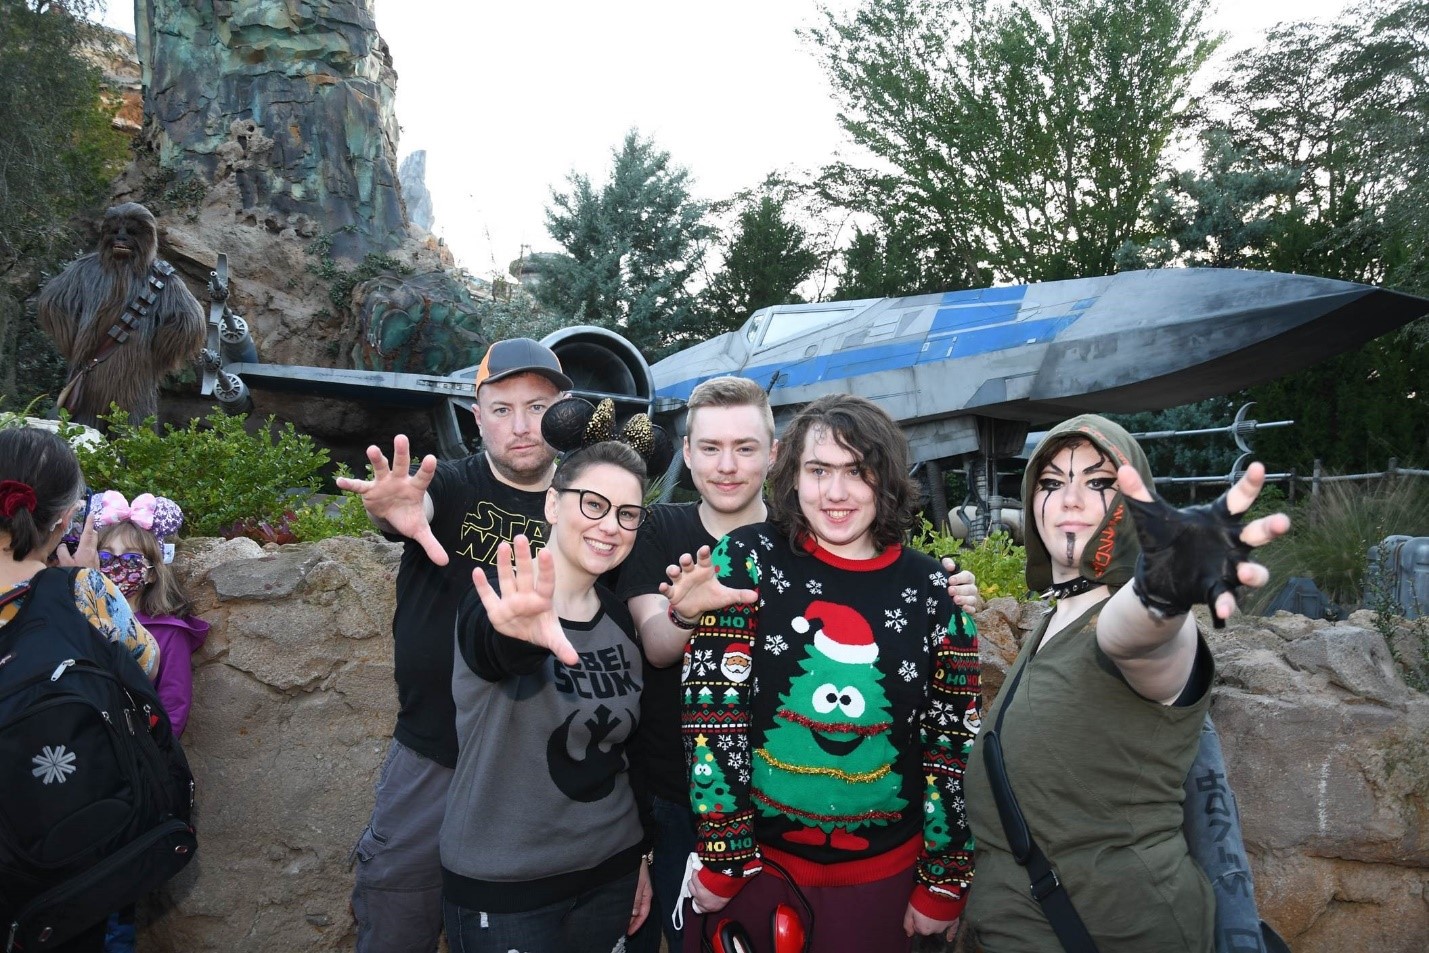 Elizabeth and her family are standing outside the Star Wars attraction with outstretched arms, using the force. 